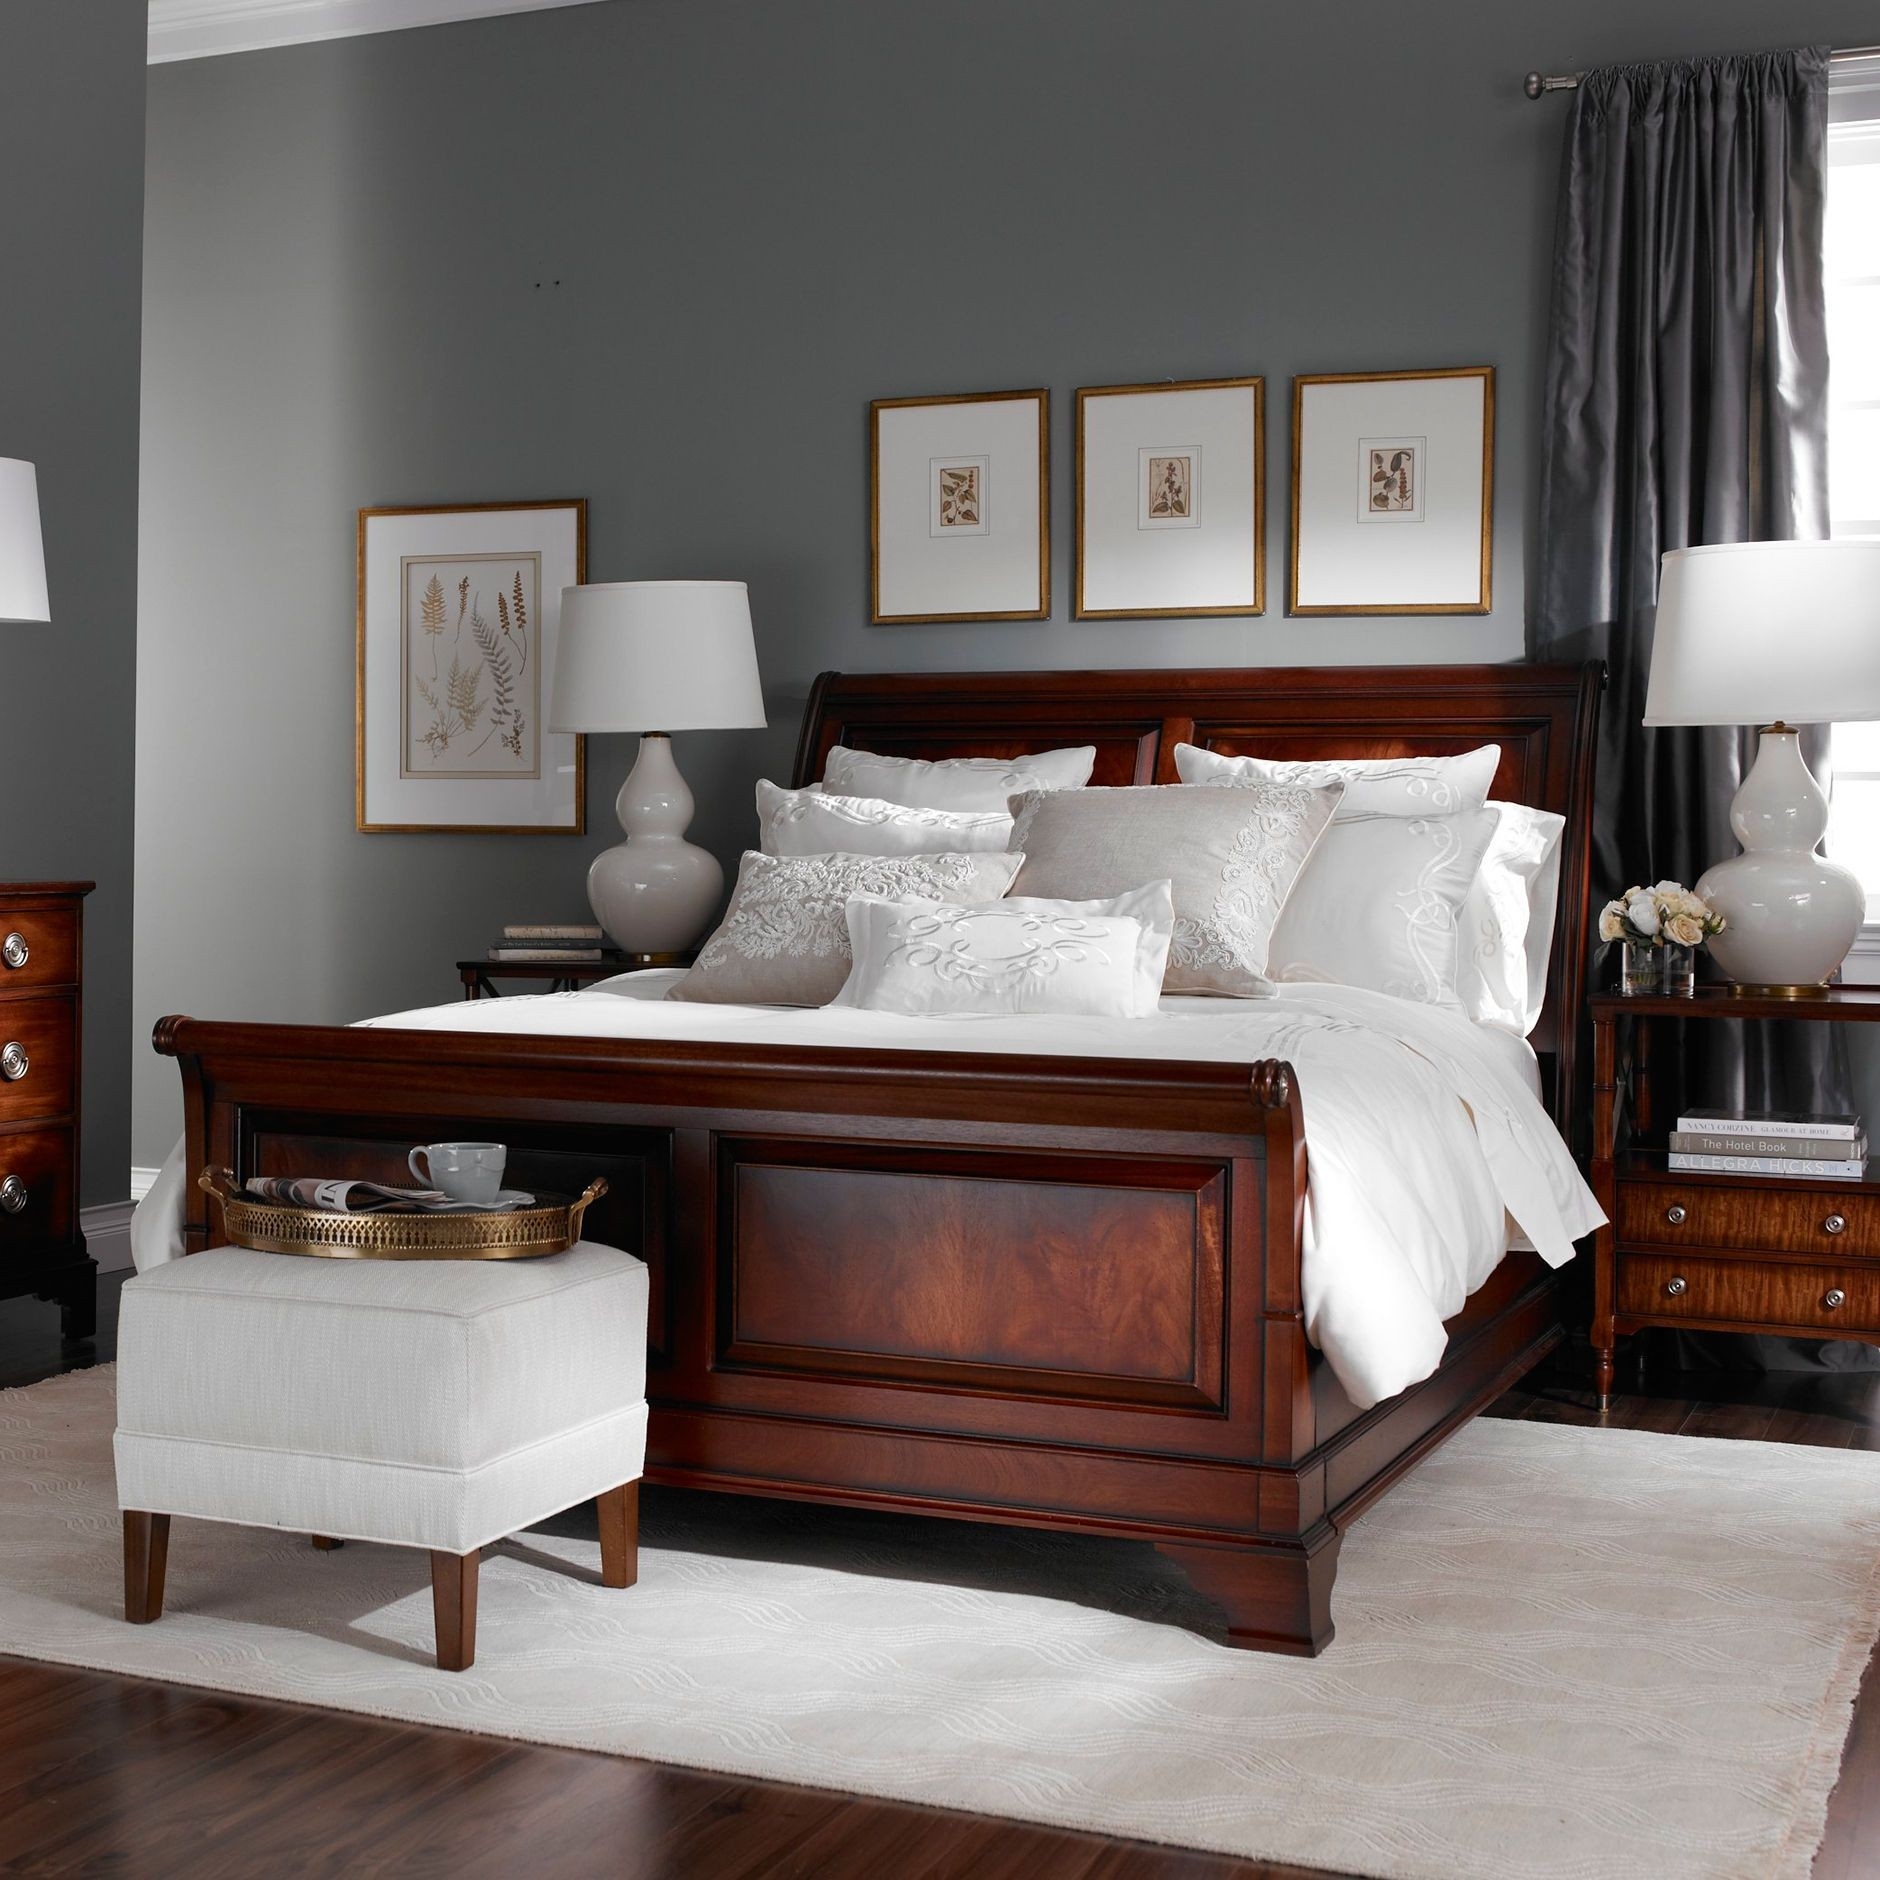 Create A Focal Point Bedroom Decorating Ideas